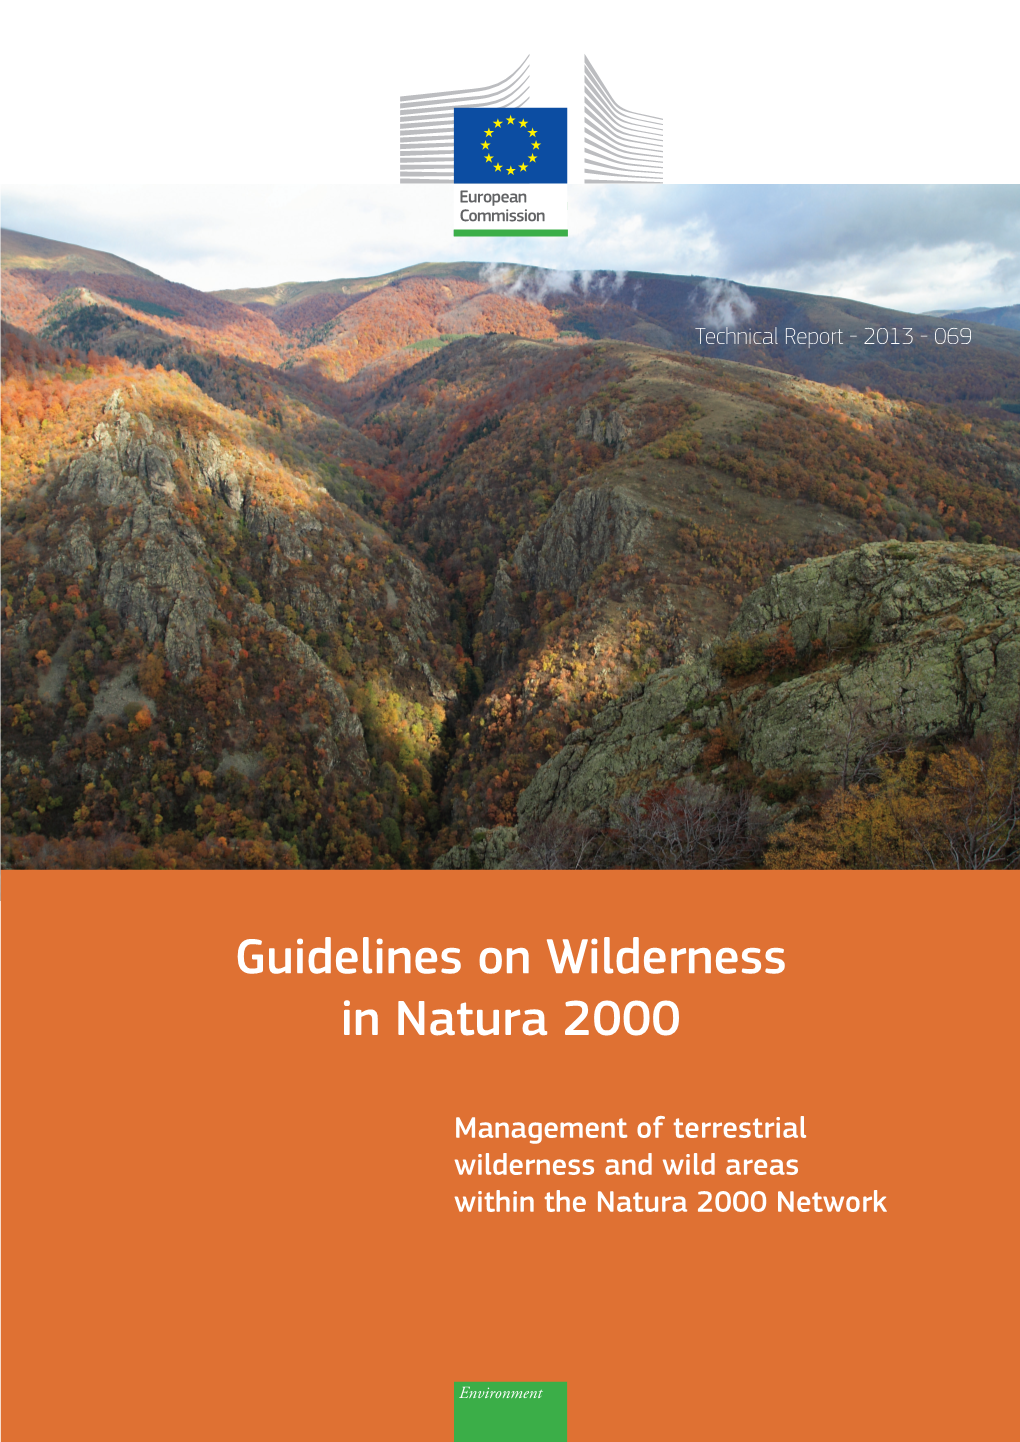 Guidelines on Wilderness in Natura 2000